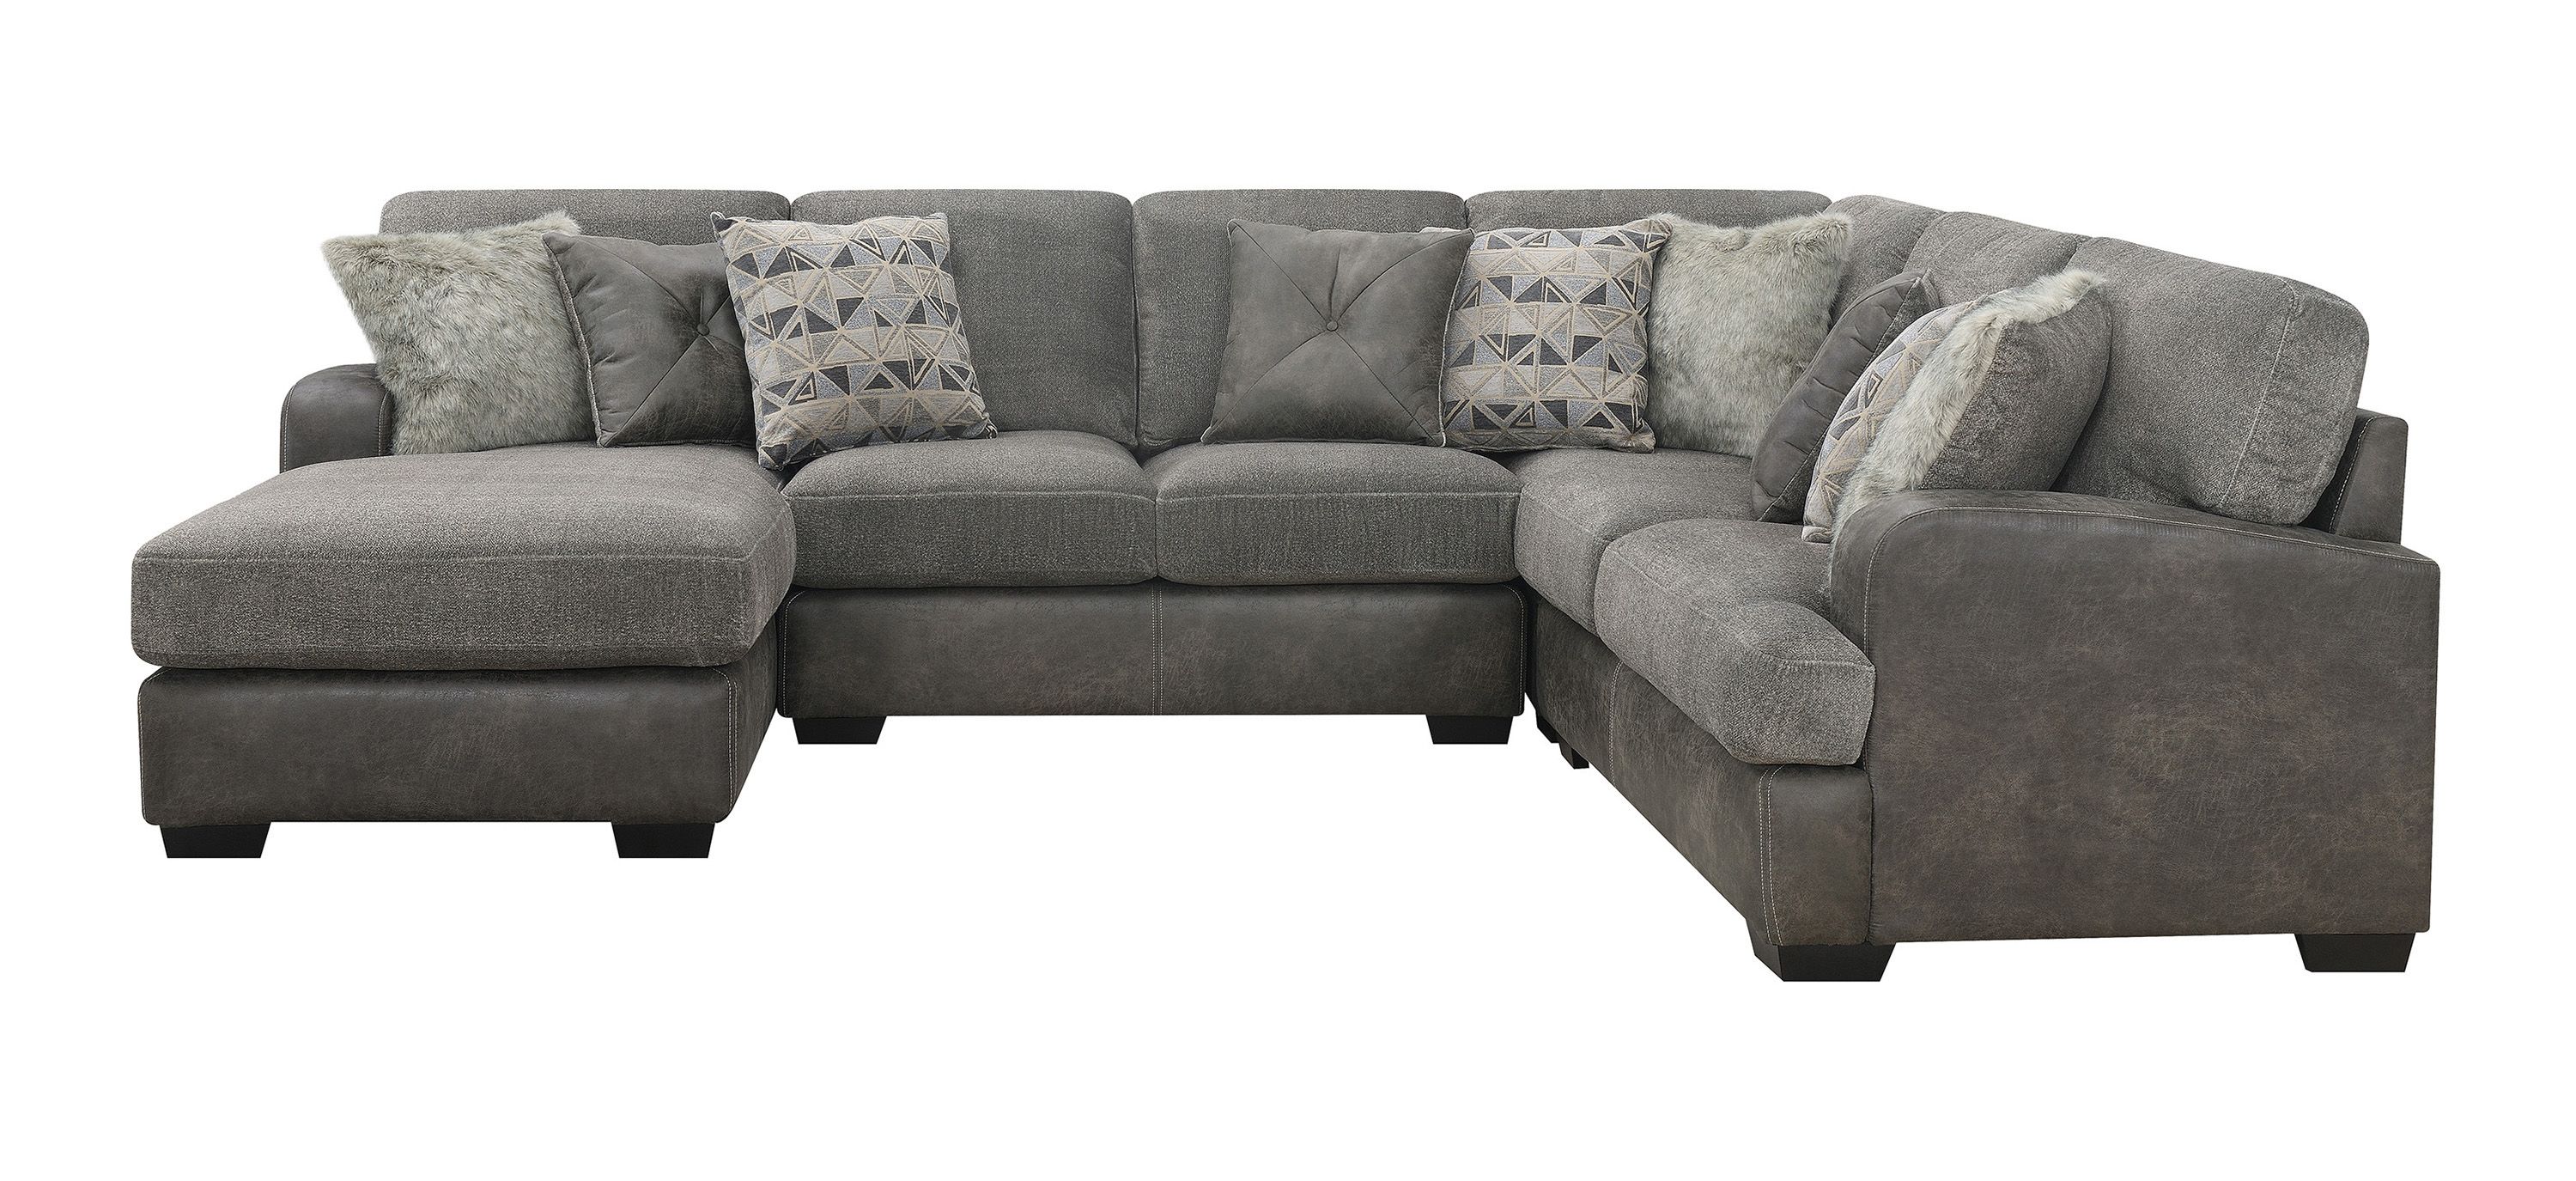 Berlin 4 pc. Sectional